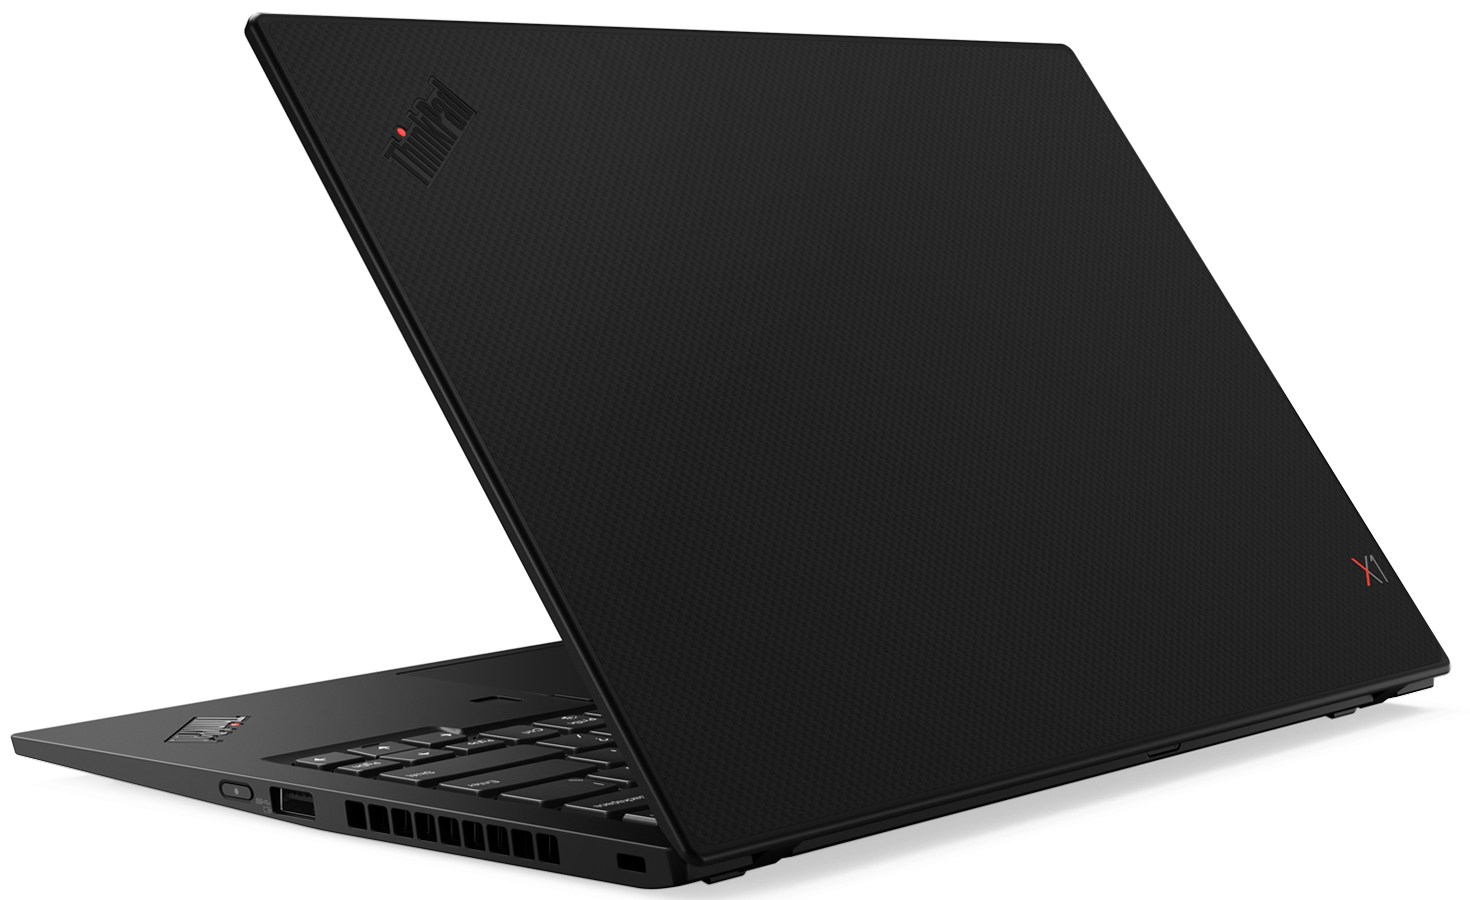 Lenovo ThinkPad X1 Carbon (7th Gen, 2019) - Specs, Tests, and